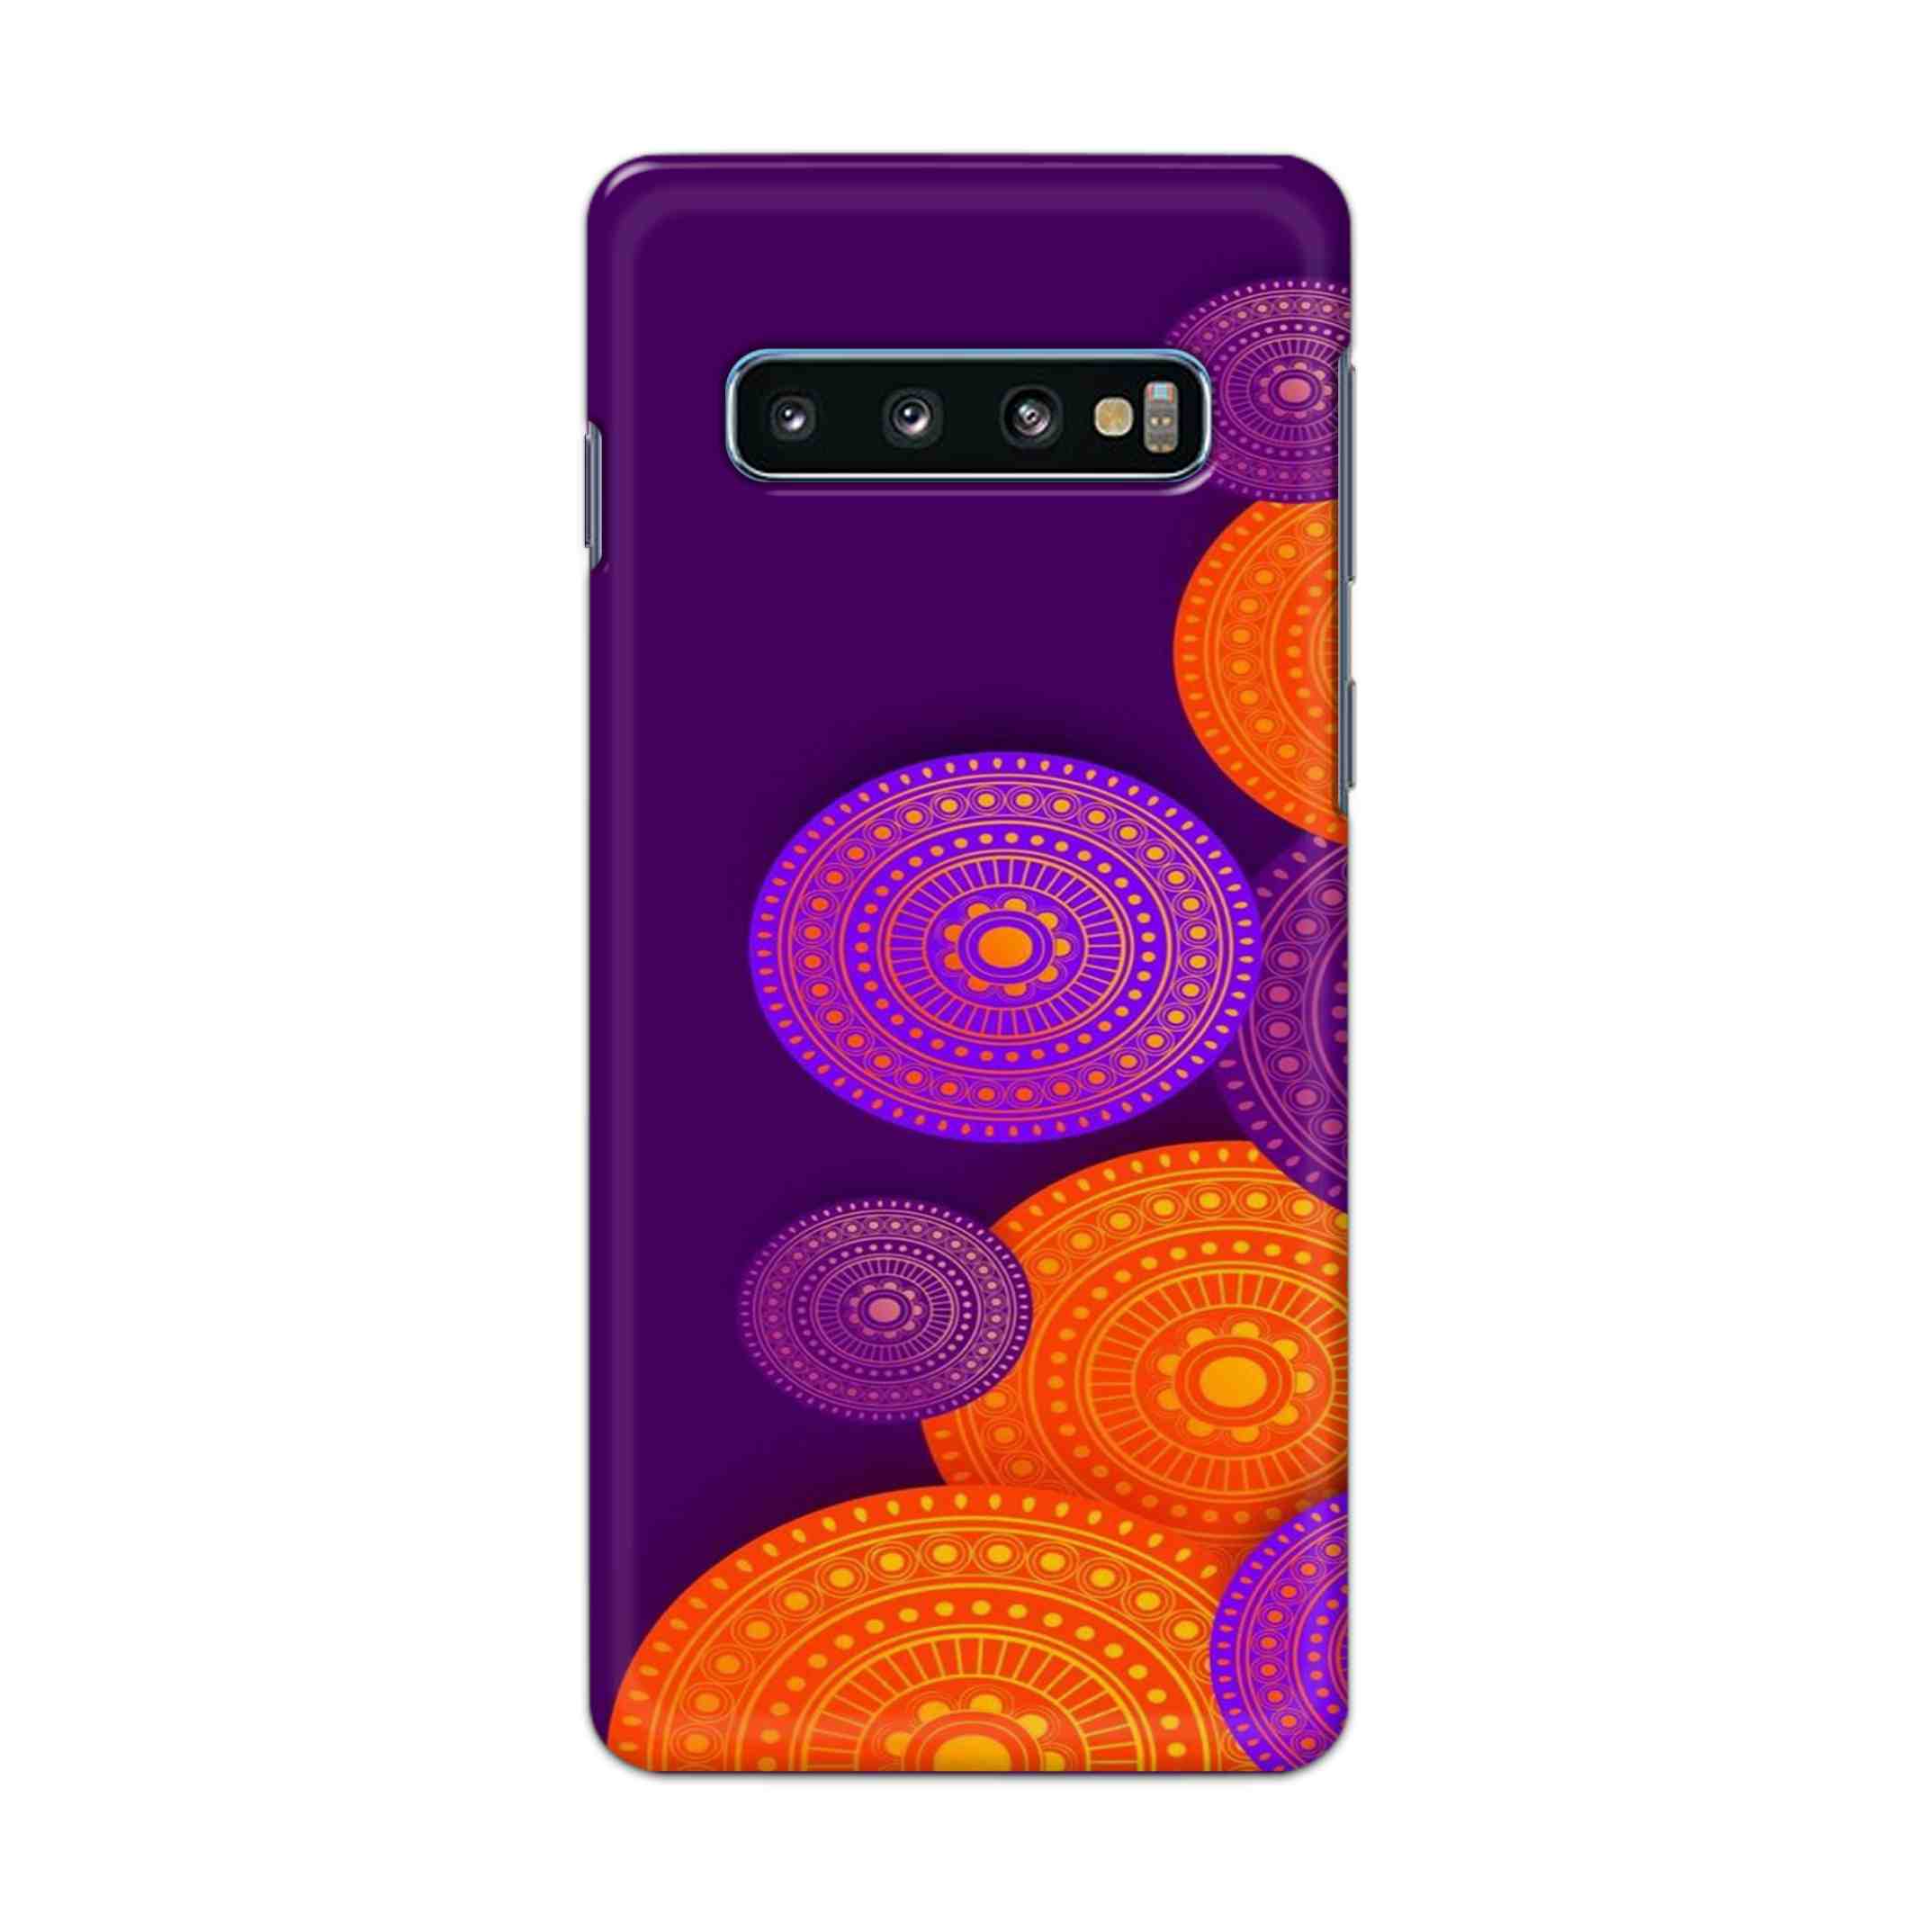 Buy Sand Mandalas Hard Back Mobile Phone Case Cover For Samsung Galaxy S10 Plus Online